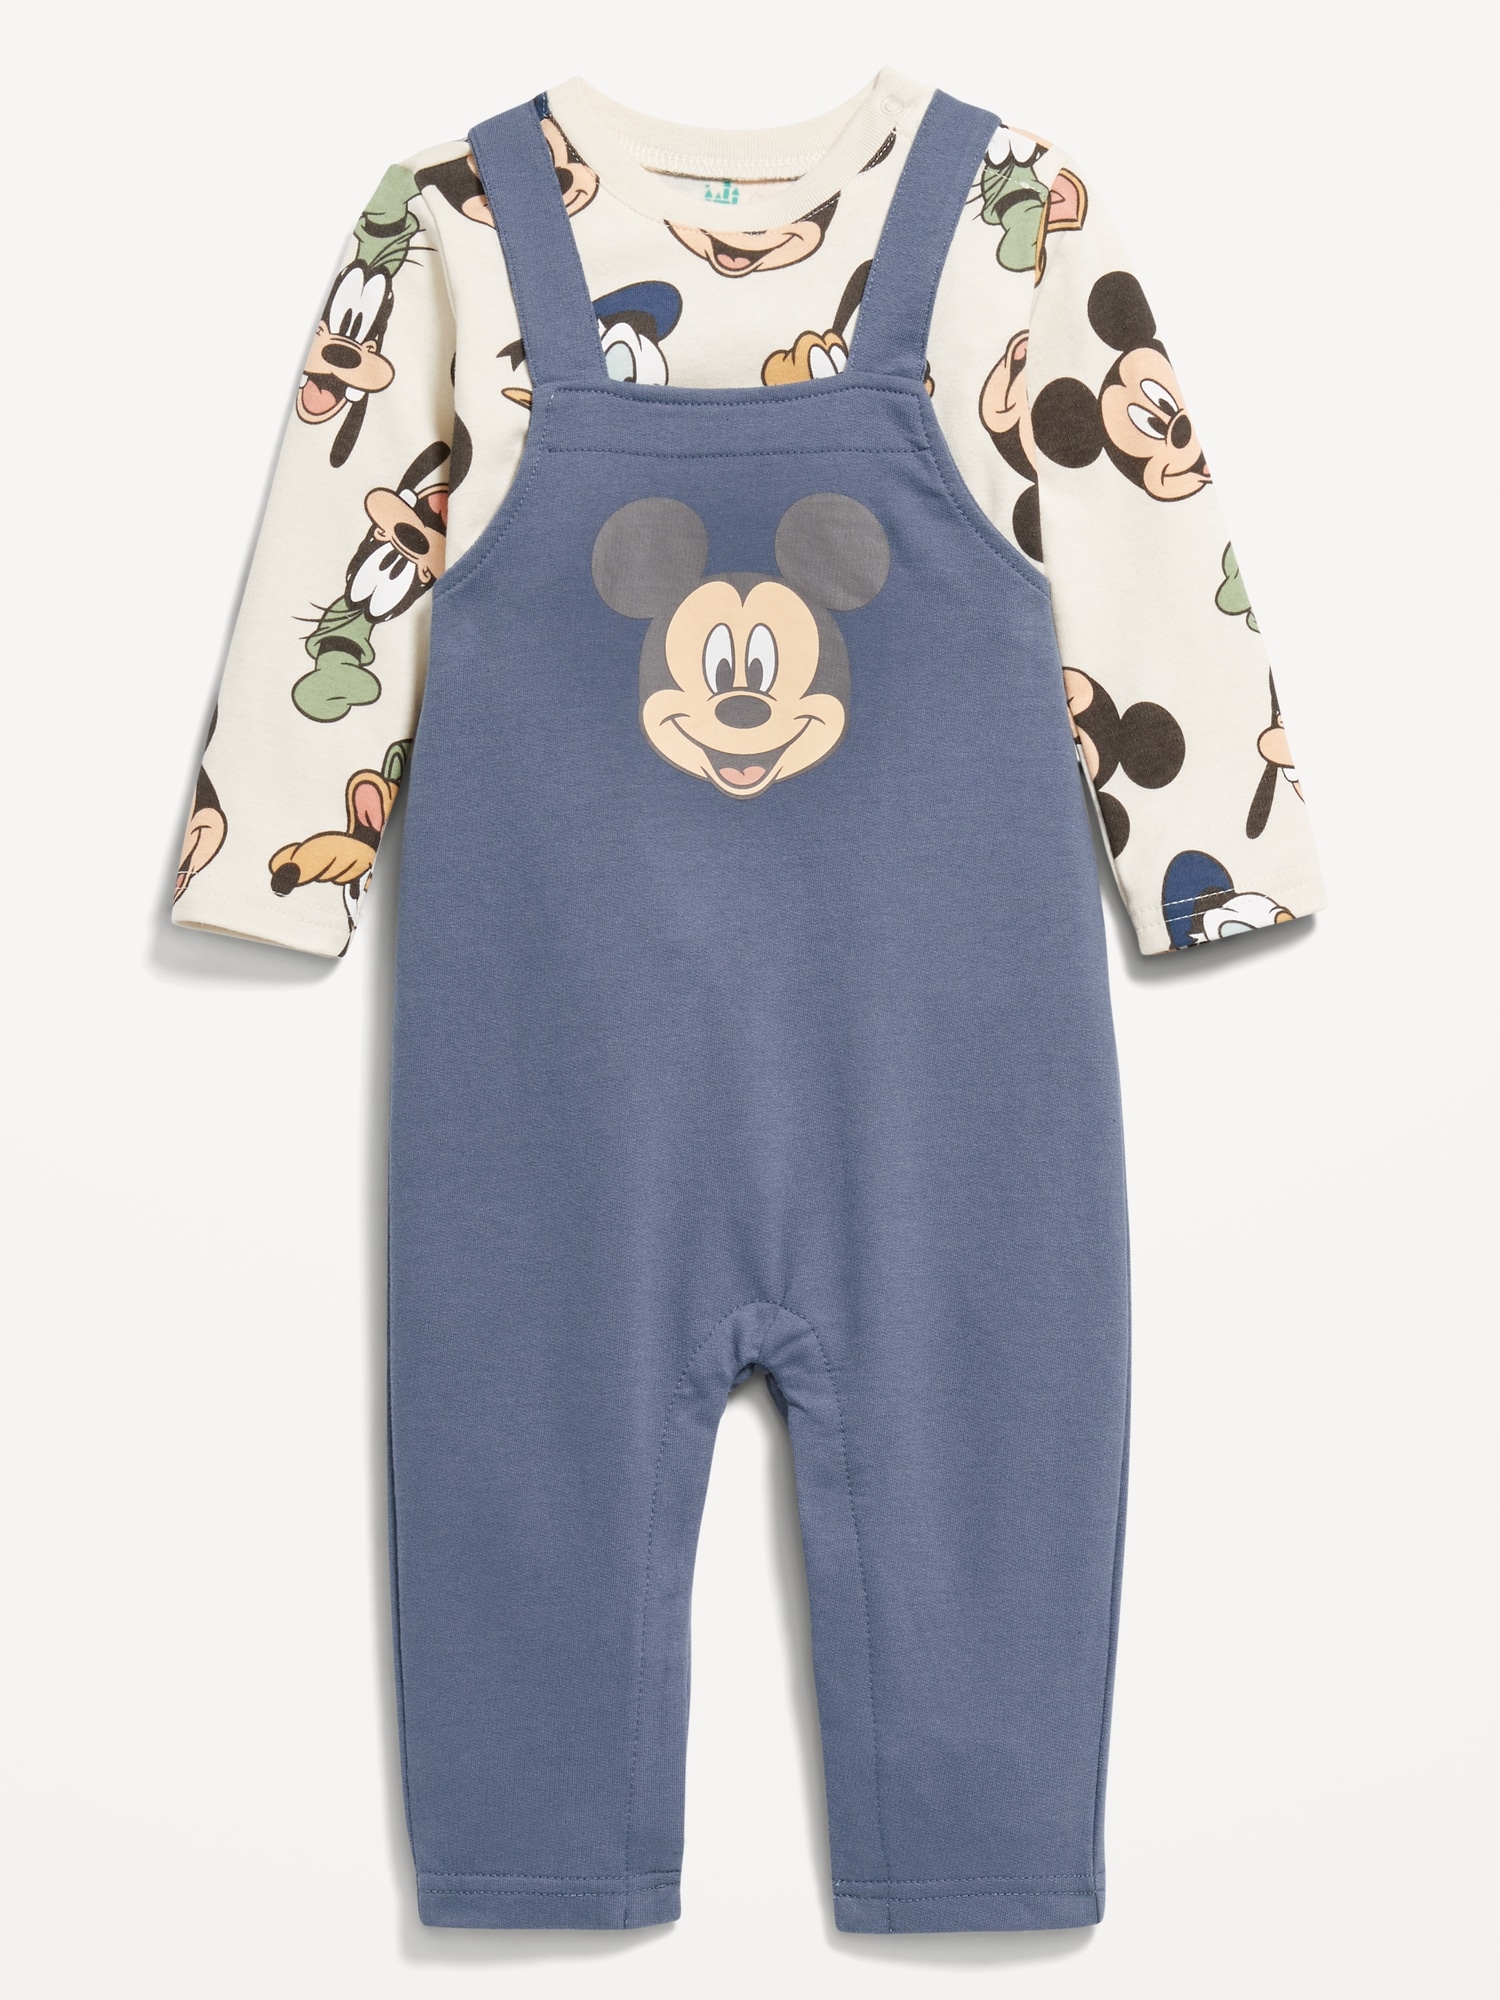 Disney© Long-Sleeve T-Shirt and Overalls Set for Baby